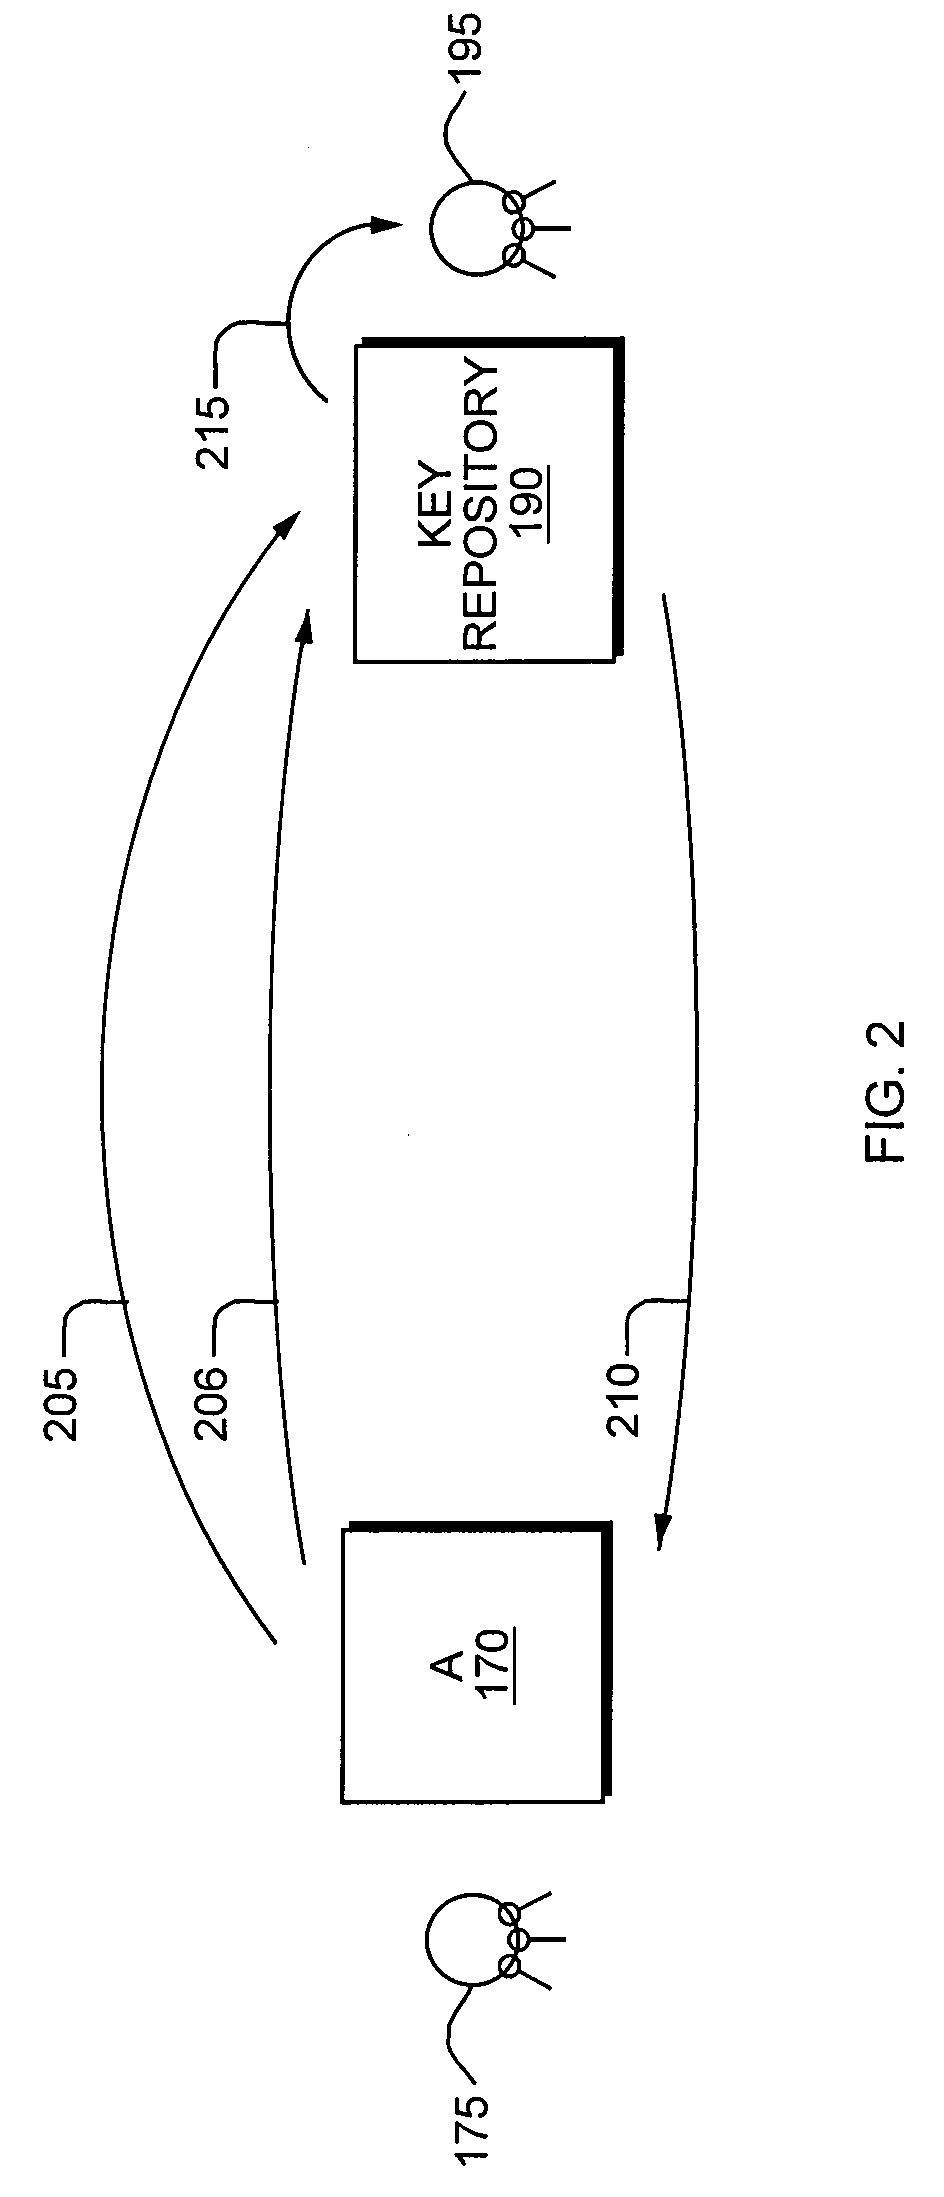 Systems and Methods for Identity-Based Secure Communications